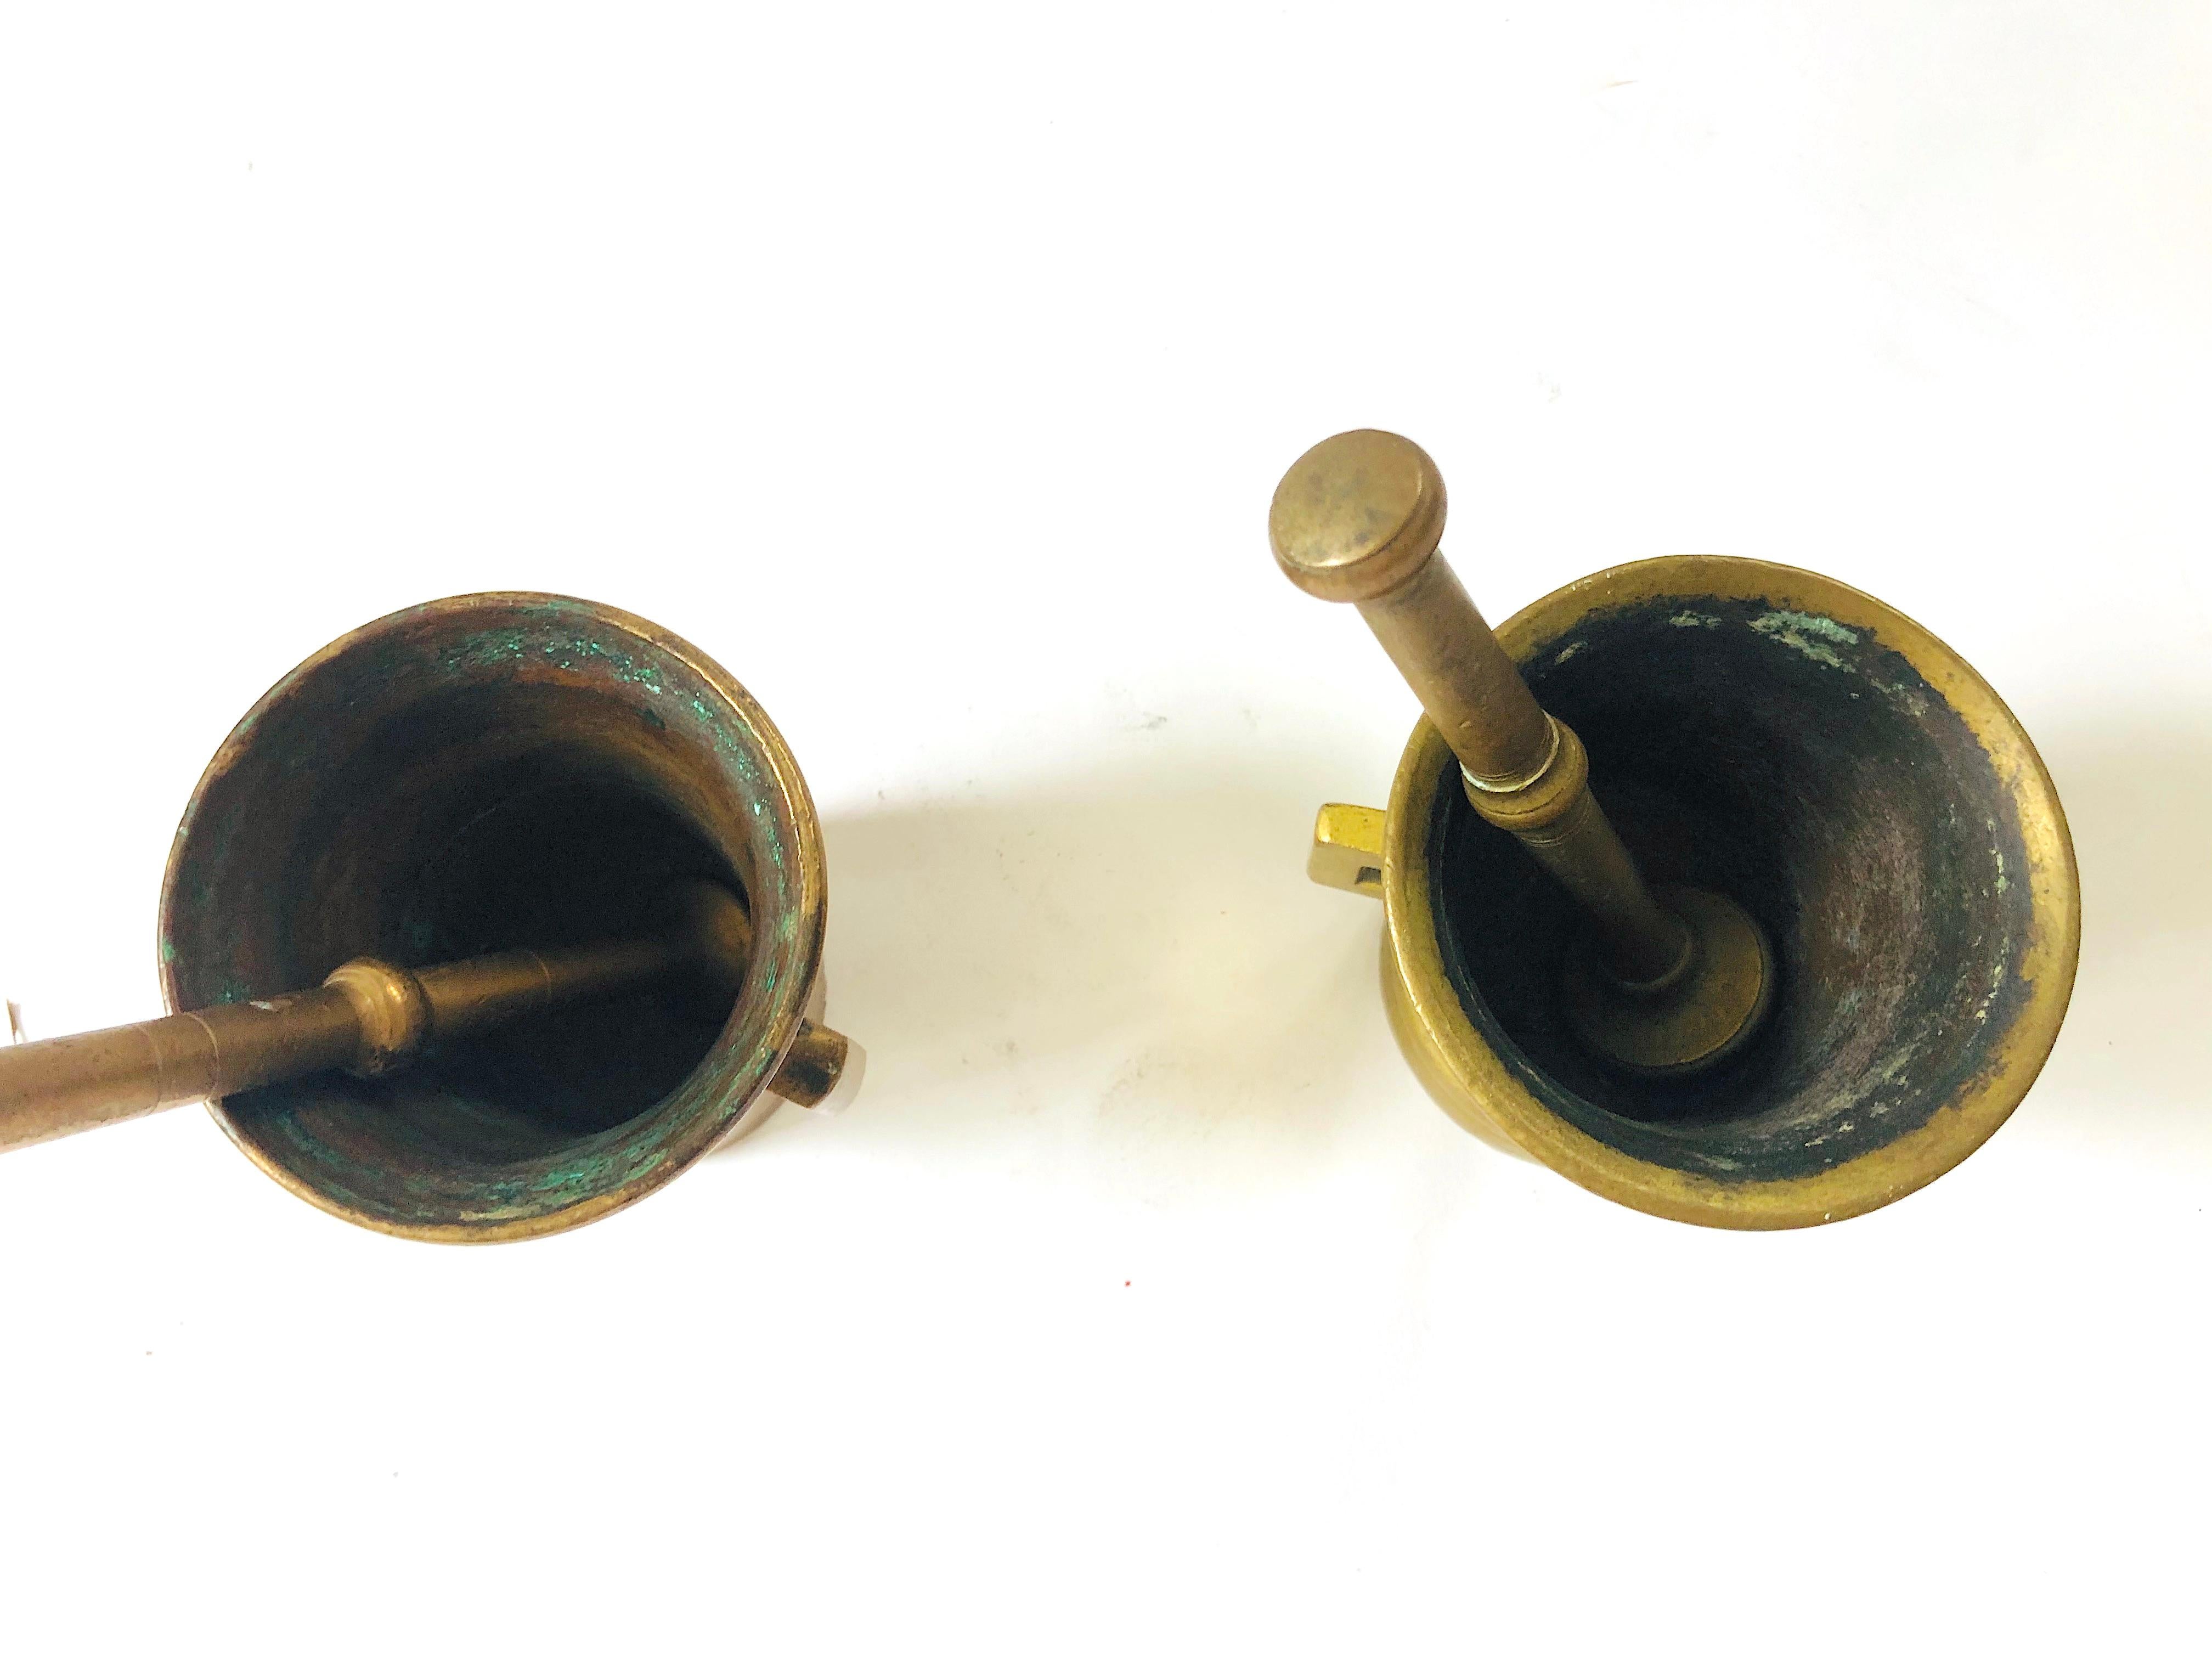 Unknown Small Antique 1900s Solid Brass Apothecary Mortars and Pestles - Set of 2 For Sale